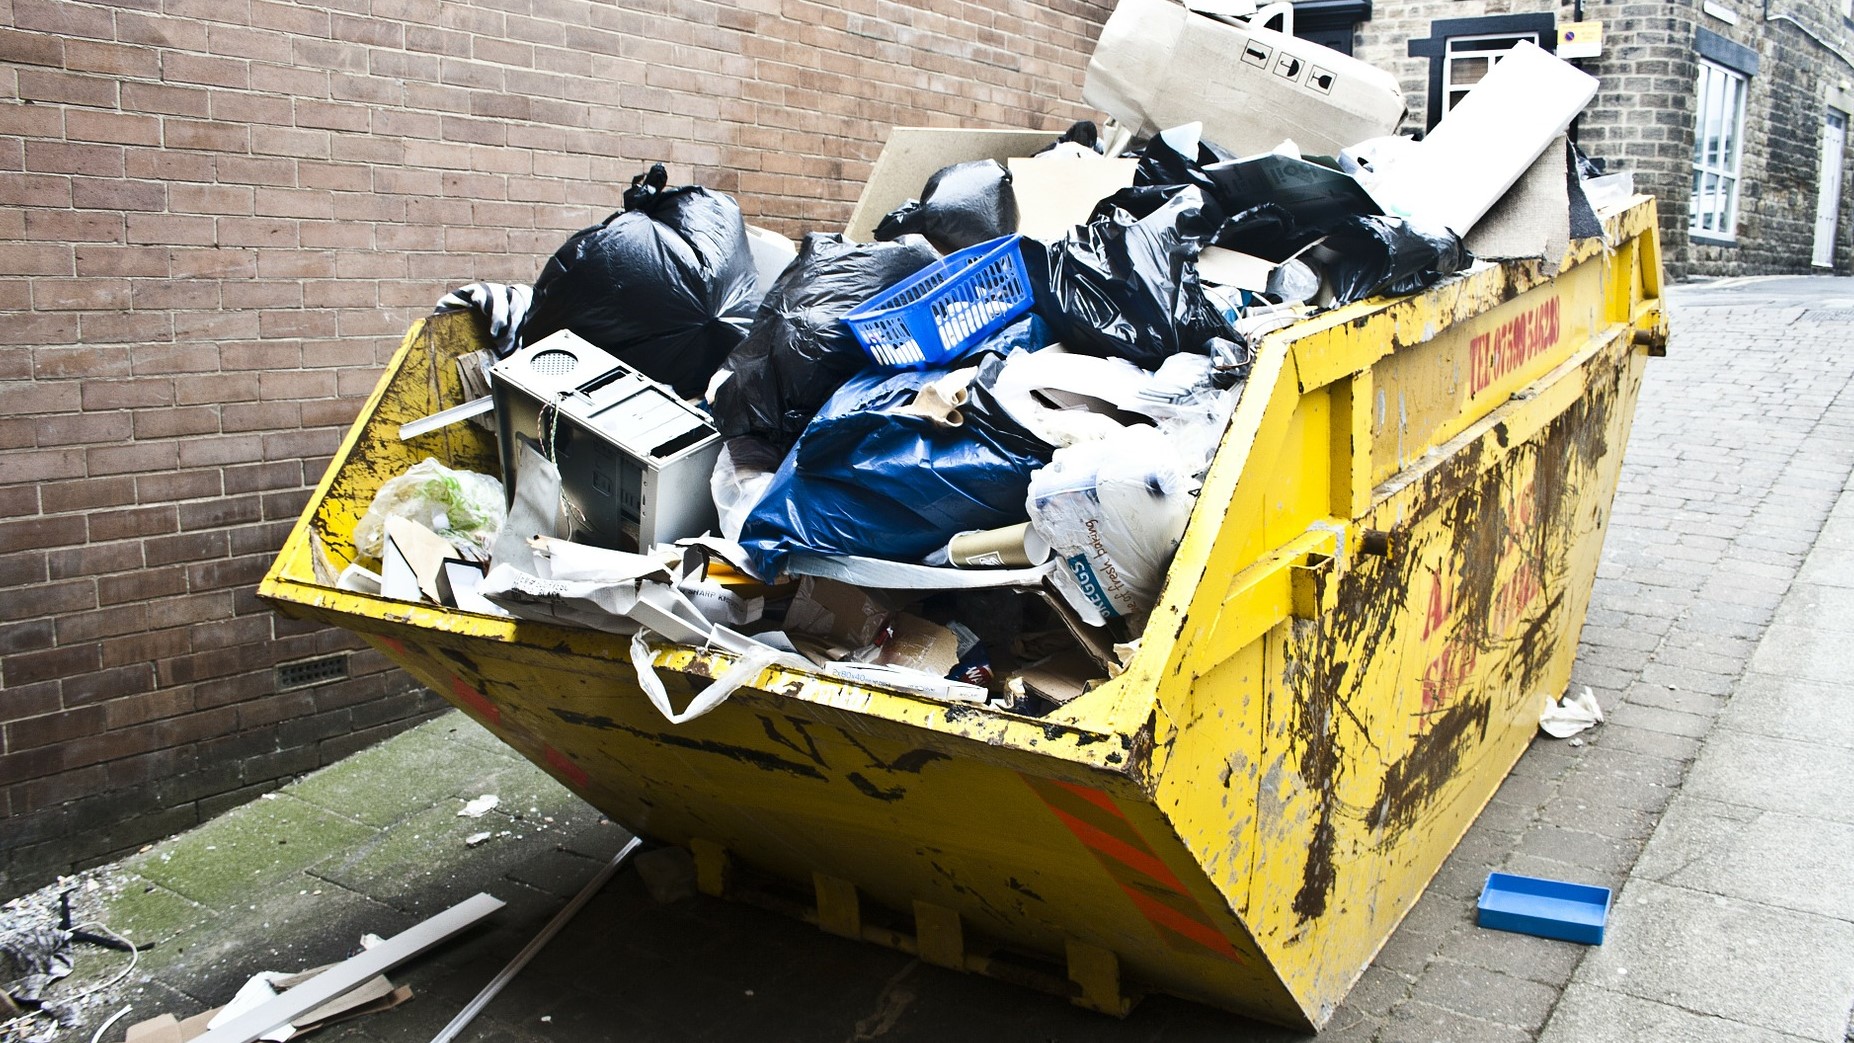 Fly tipping law - what is classed as fly tipping